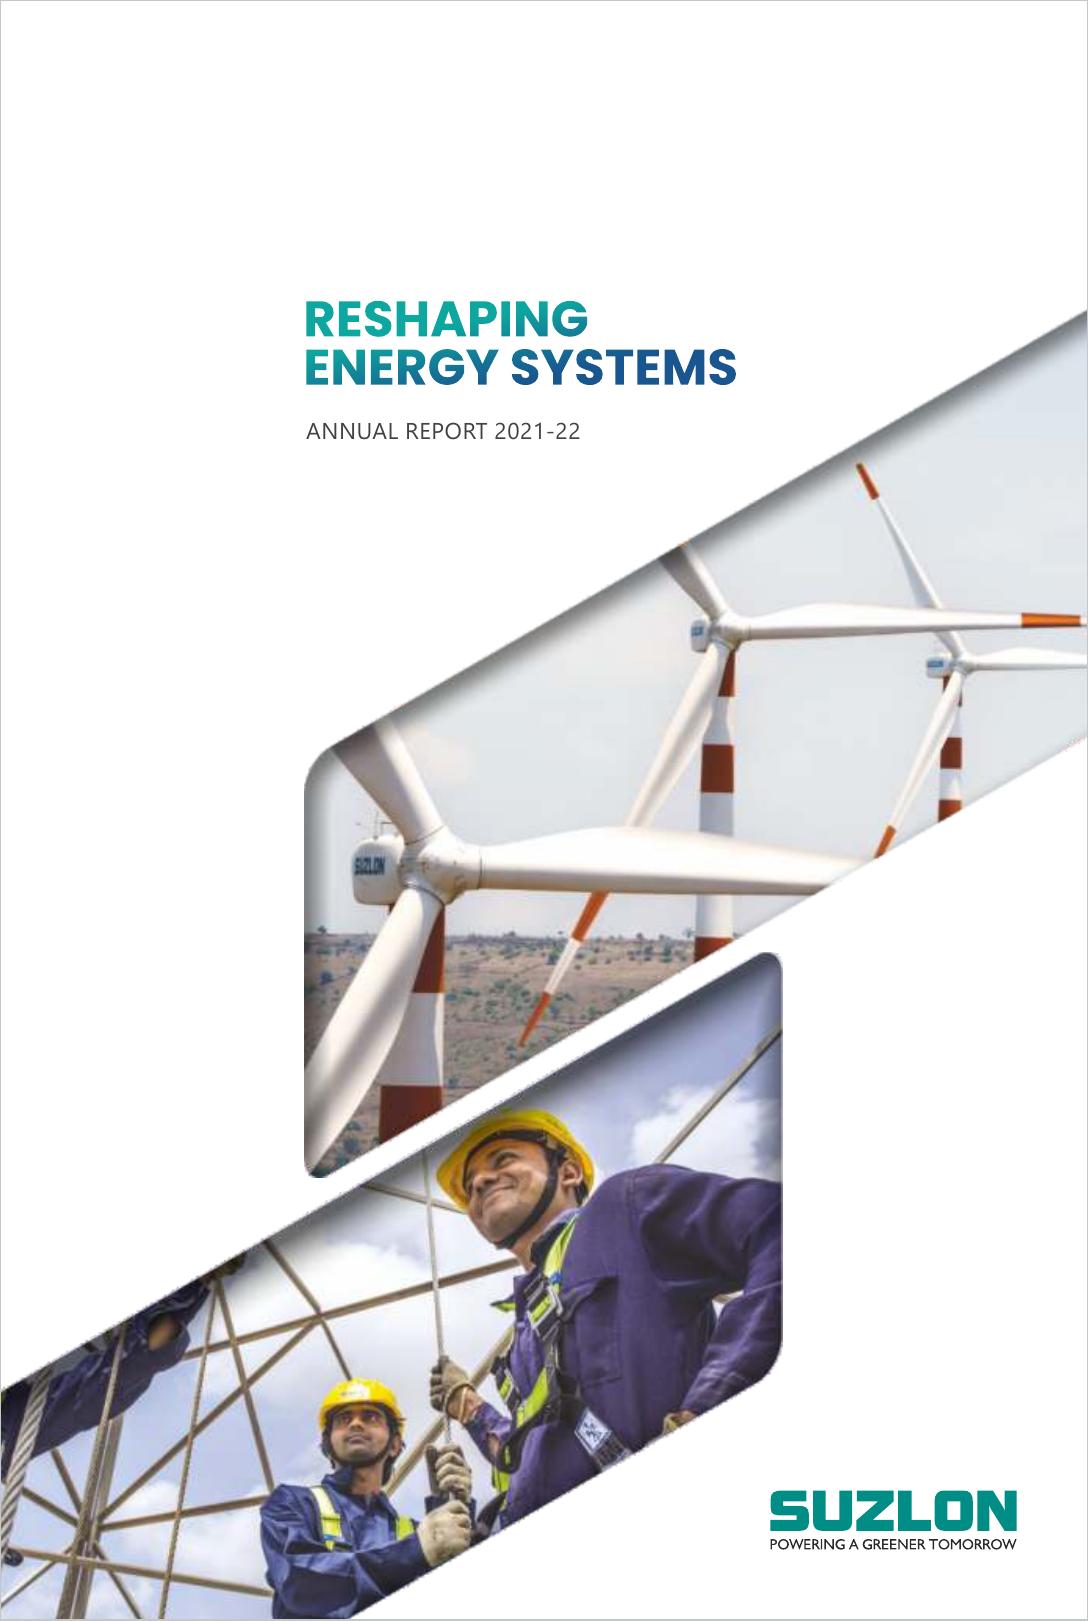 SOURCEENERGYSERVICES 2022 Annual Report